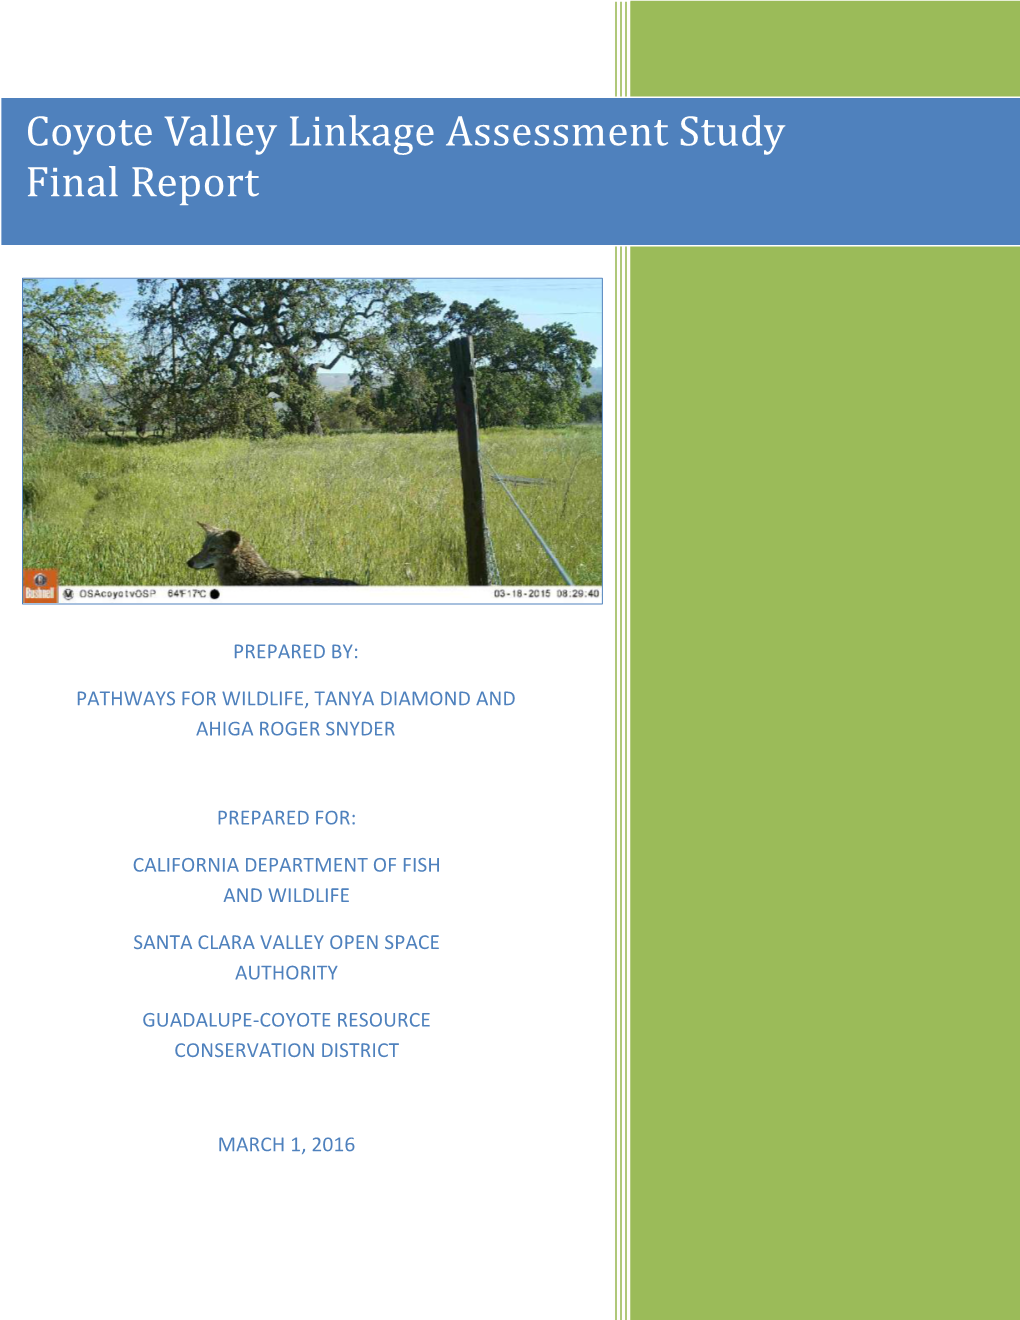 Coyote Valley Linkage Assessment Study Final Report